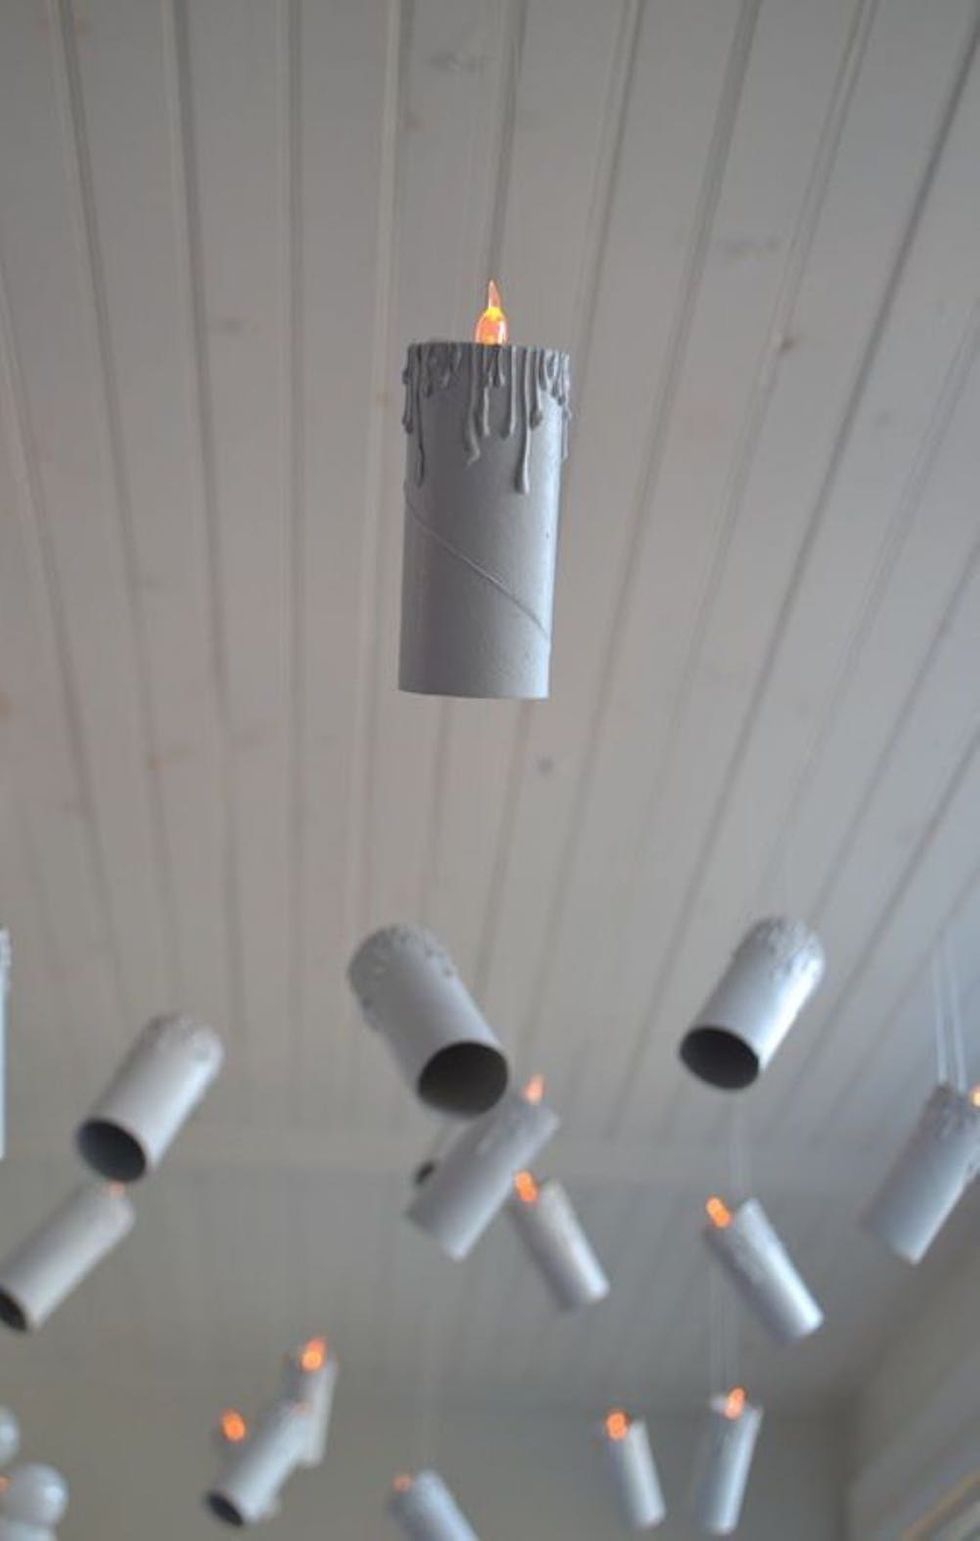 Halloween candle decor ideas indoors grey hanging electric candles